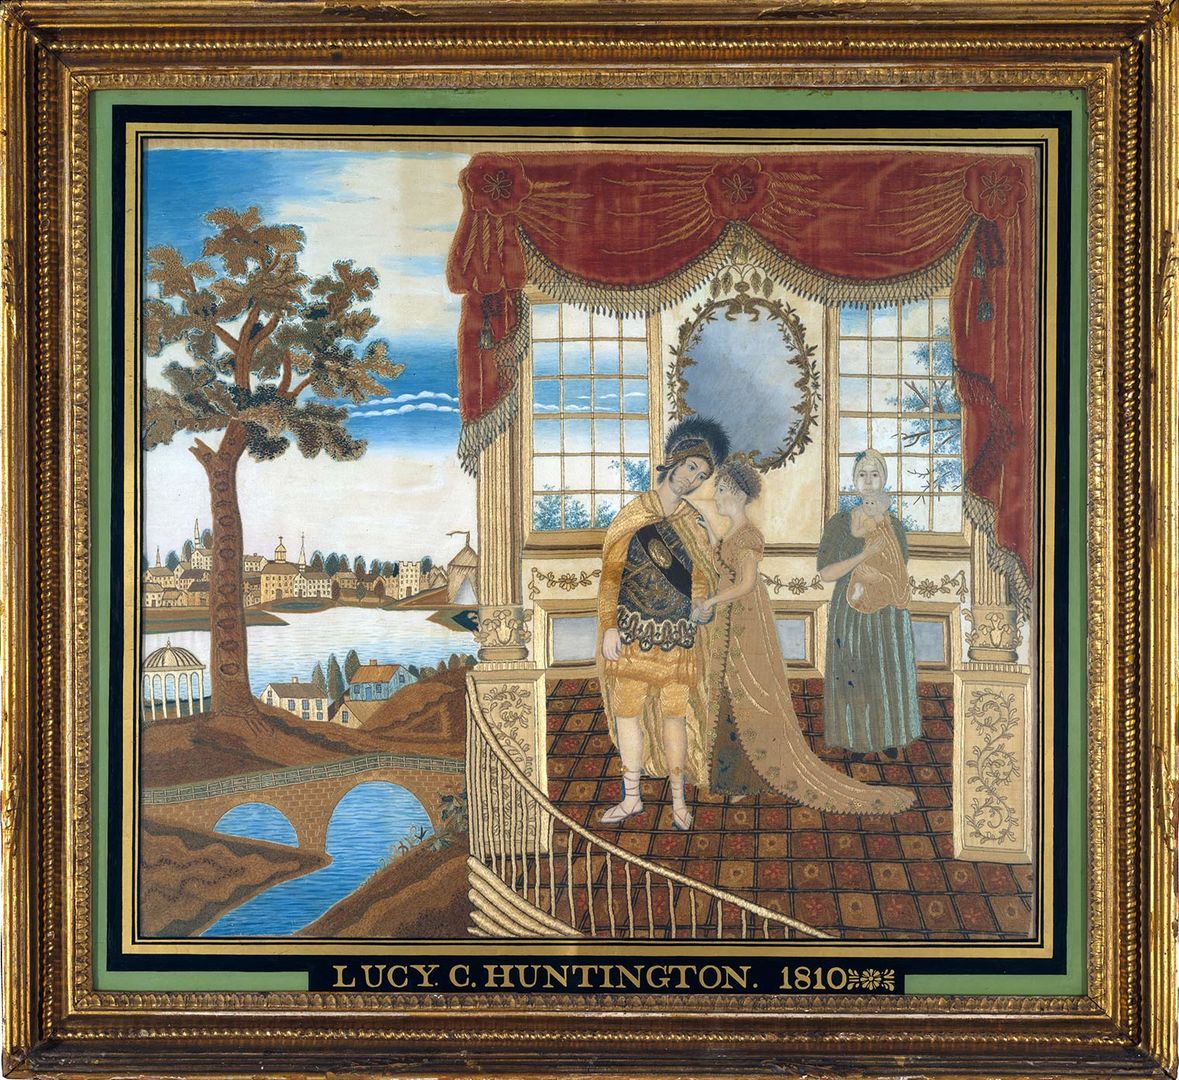 Image of a sampler by Lucy Huntington shows a male soldier Hector saying goodbye to his wife and baby on a balcony that overlooks trees, towns, and rivers.